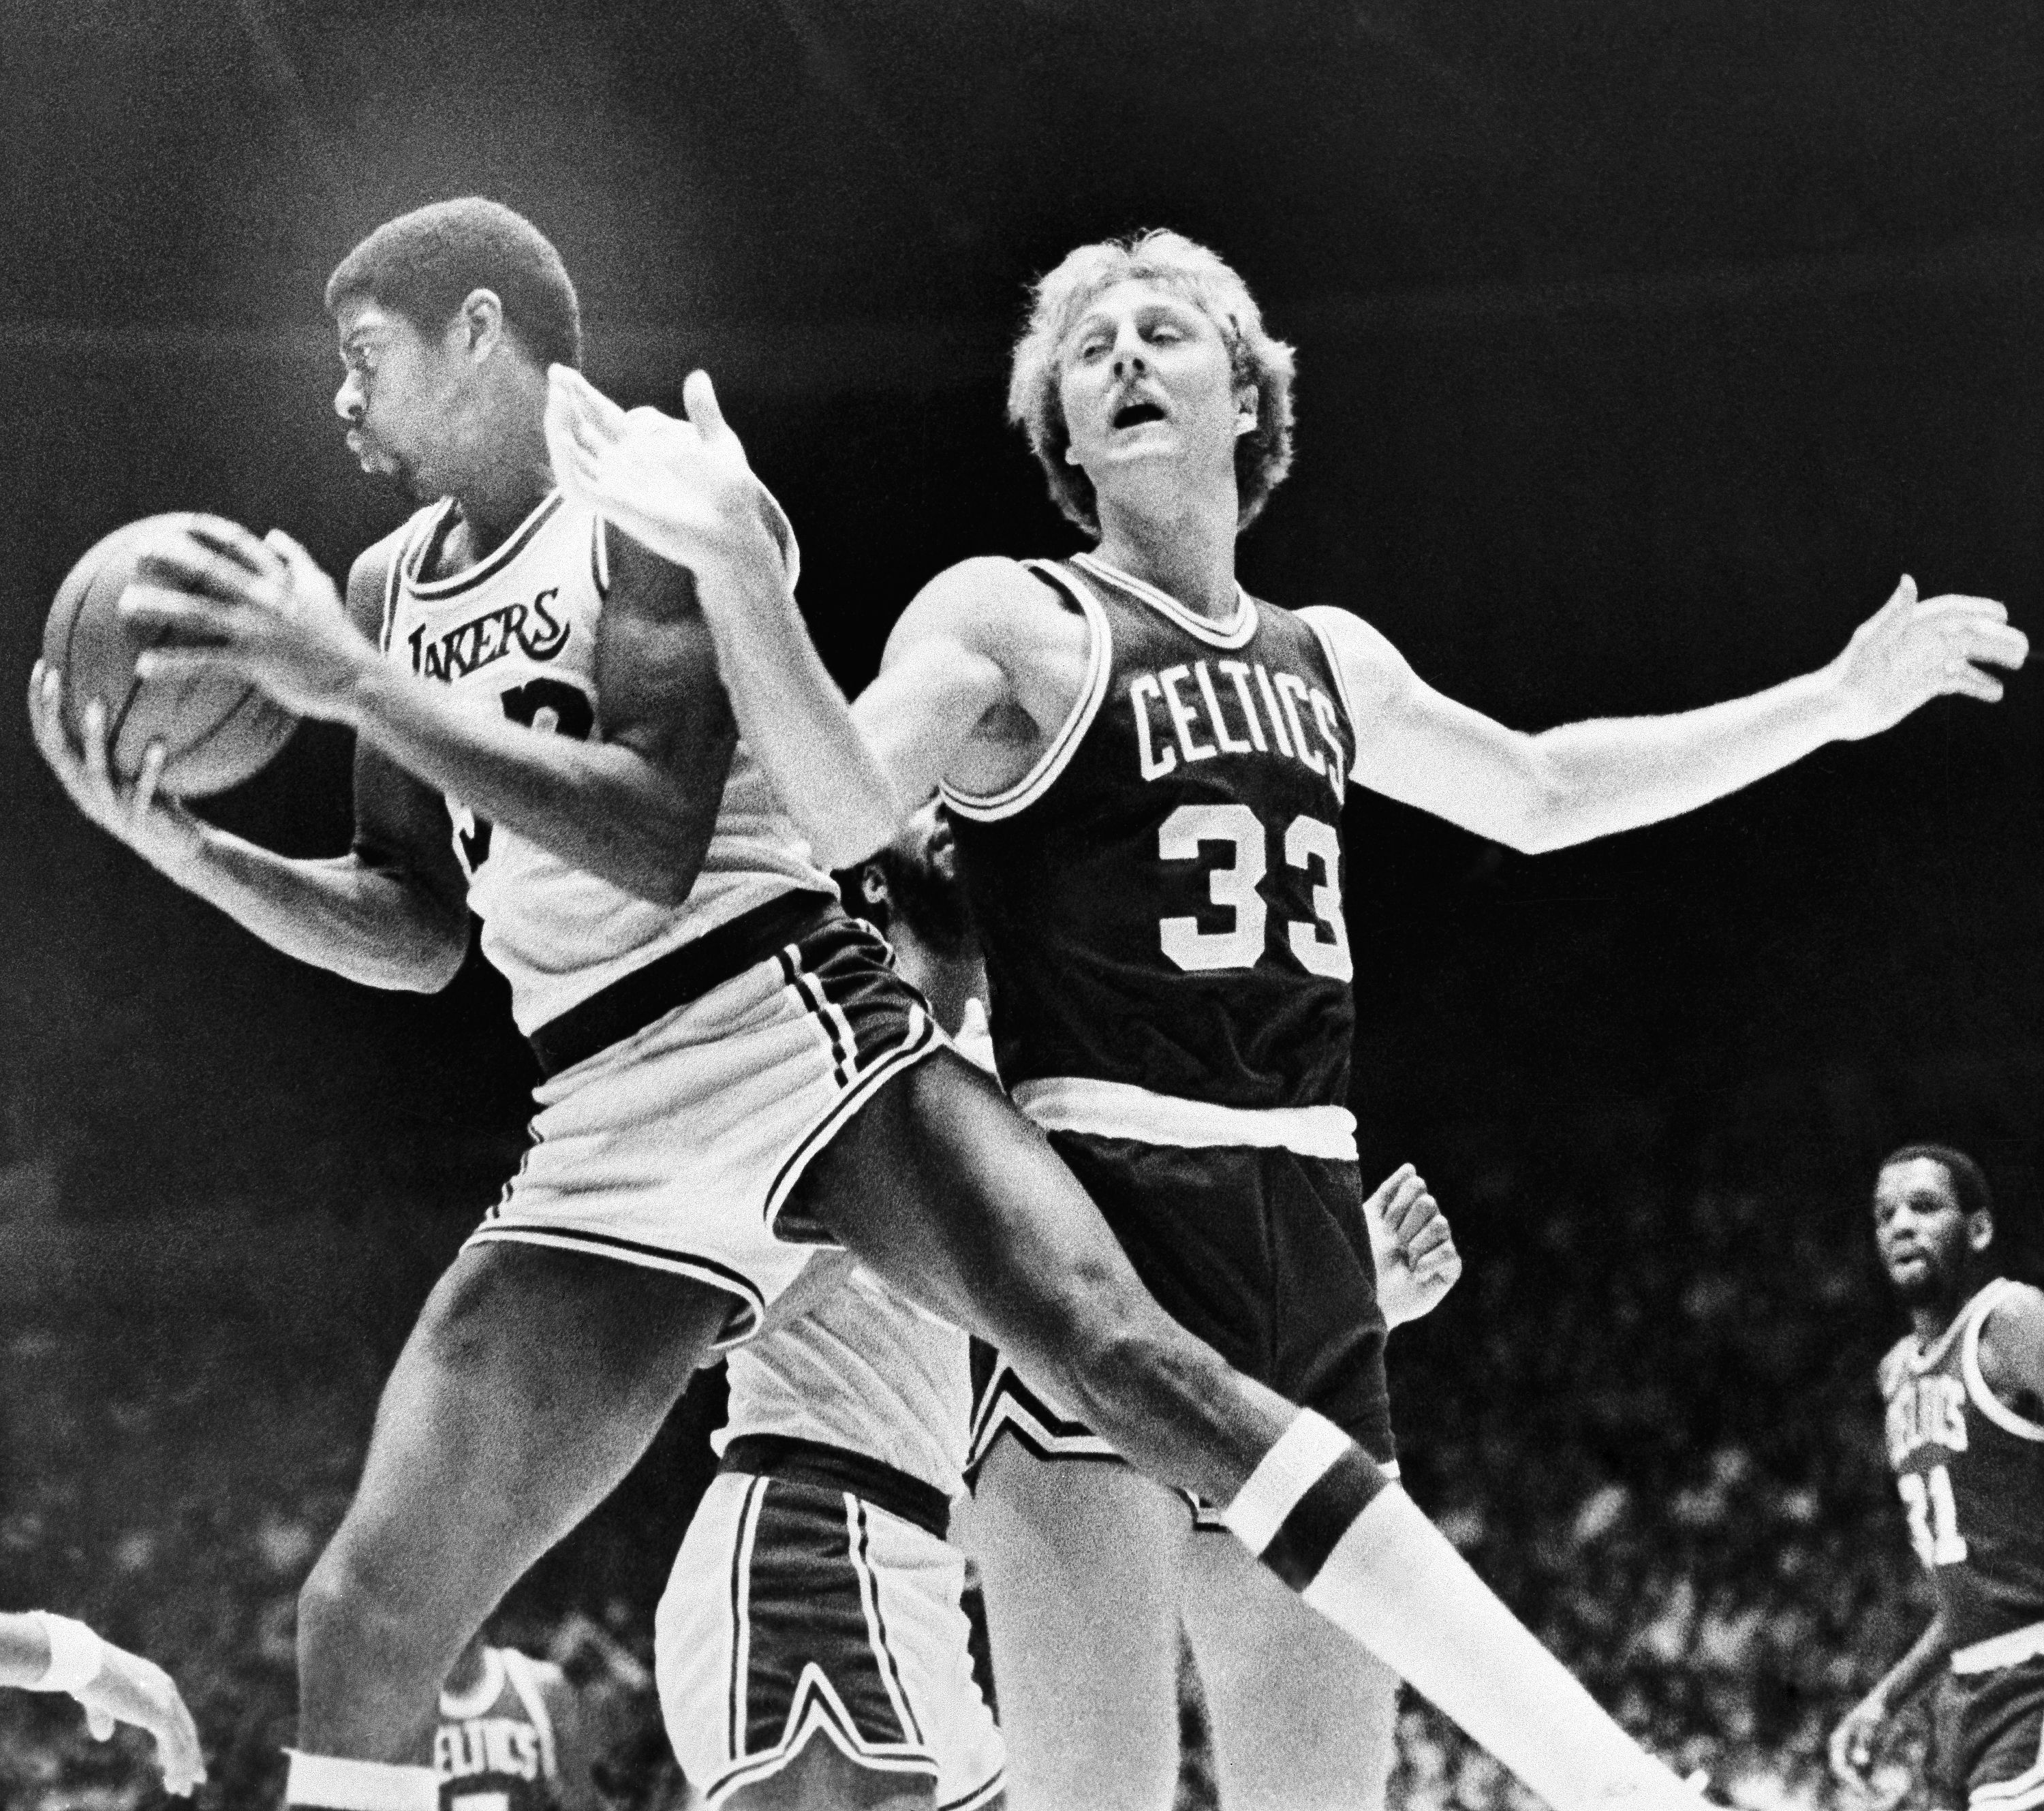 1986 Larry Bird & Magic Johnson - Made and Curated